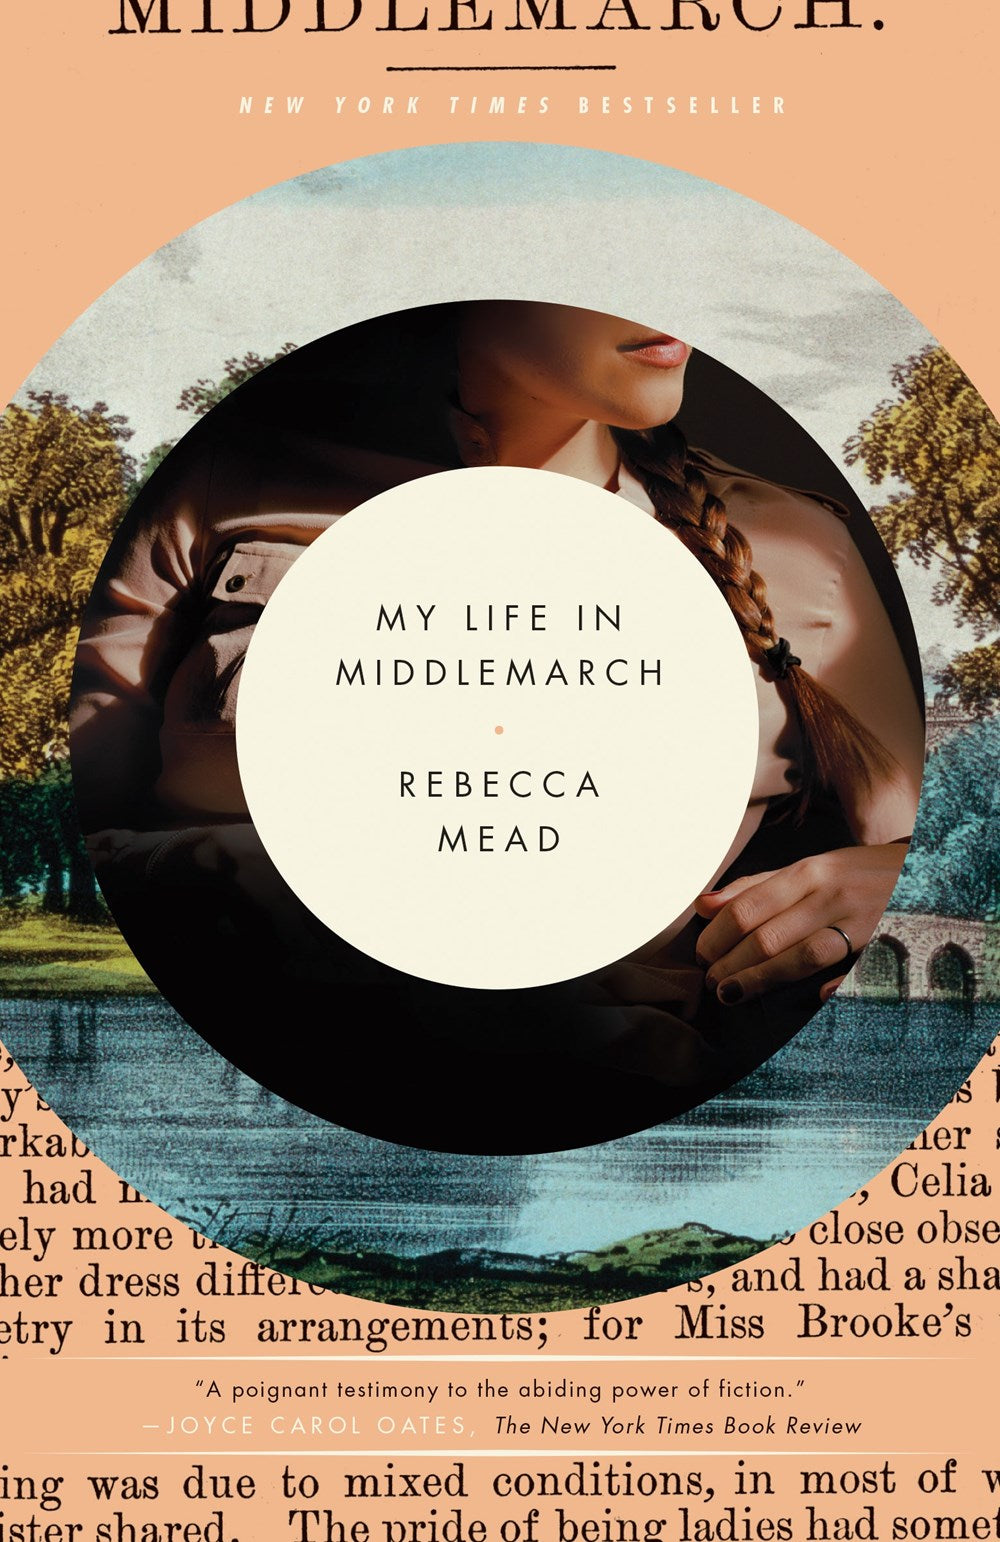 My Life in Middlemarch: A Memoir by Rebecca Mead